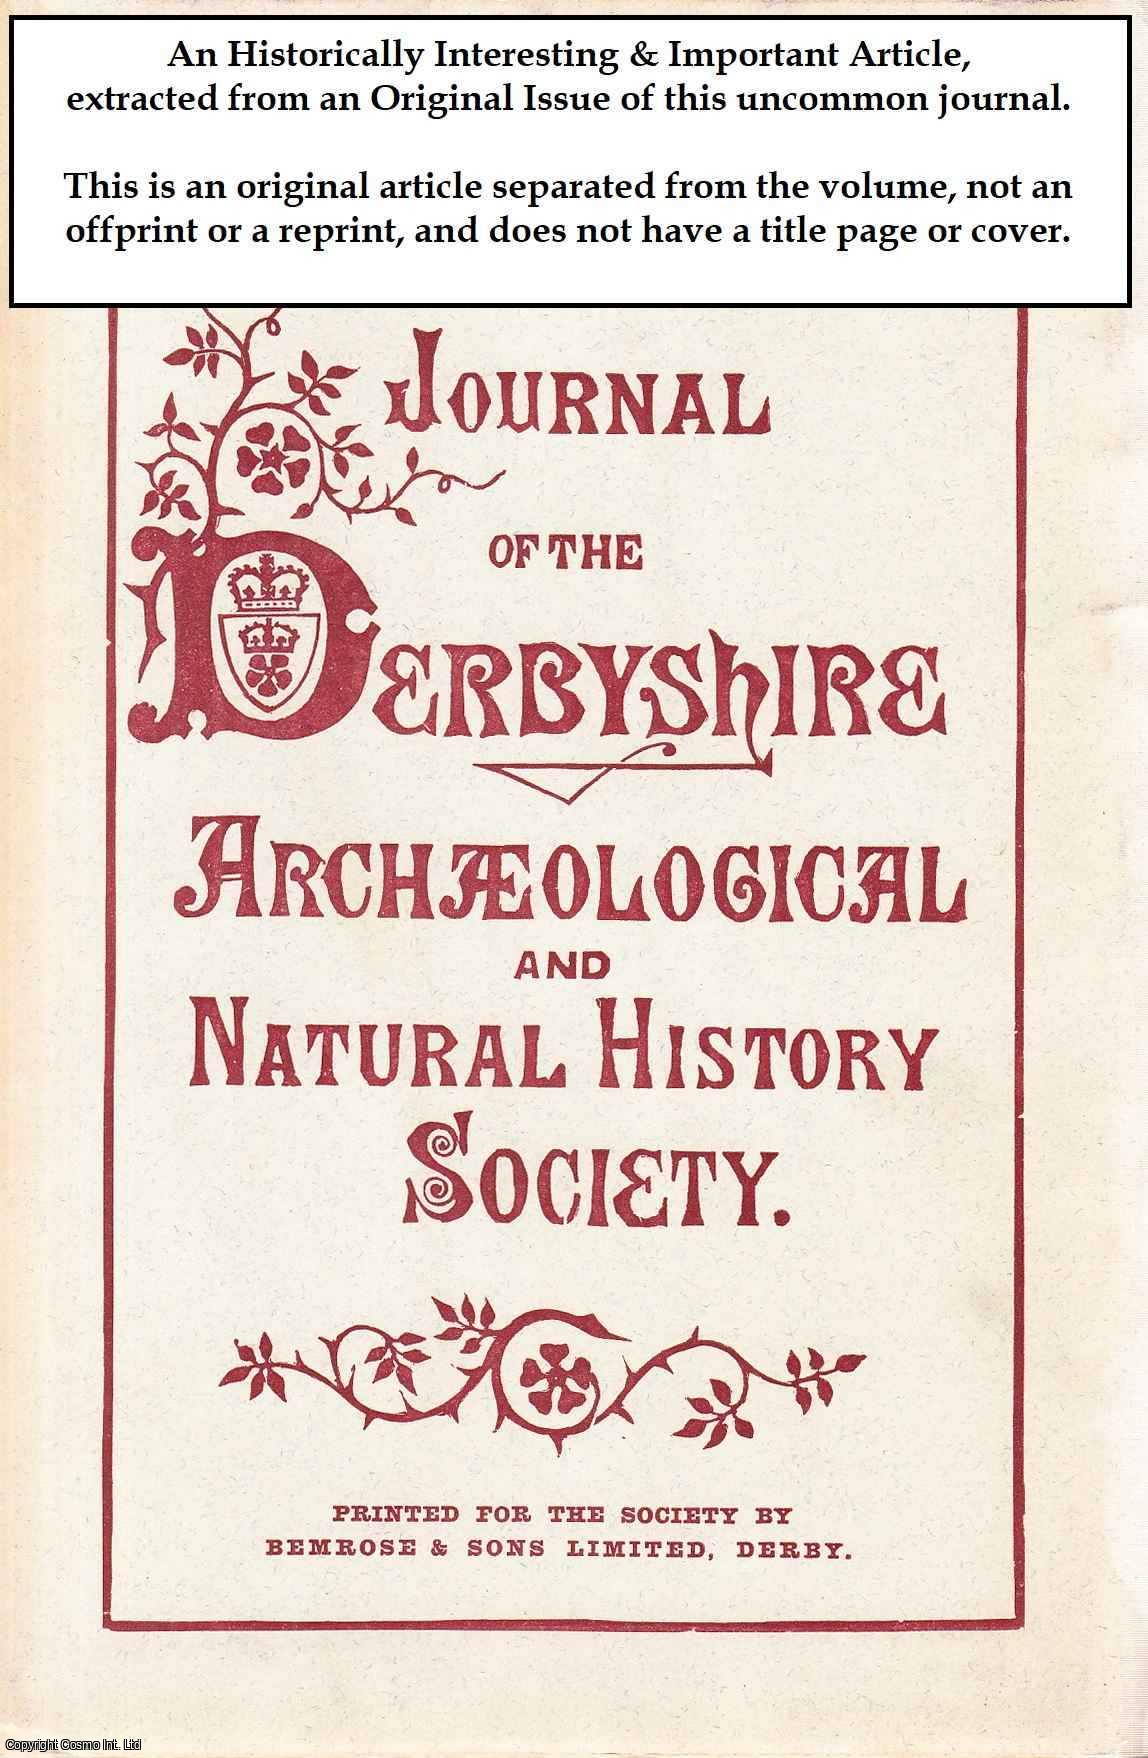 William Smithard - Records and Traces of Old Roads near Derby. An original article from the Journal of the Derbyshire Archaeological & Natural History Society, 1913.